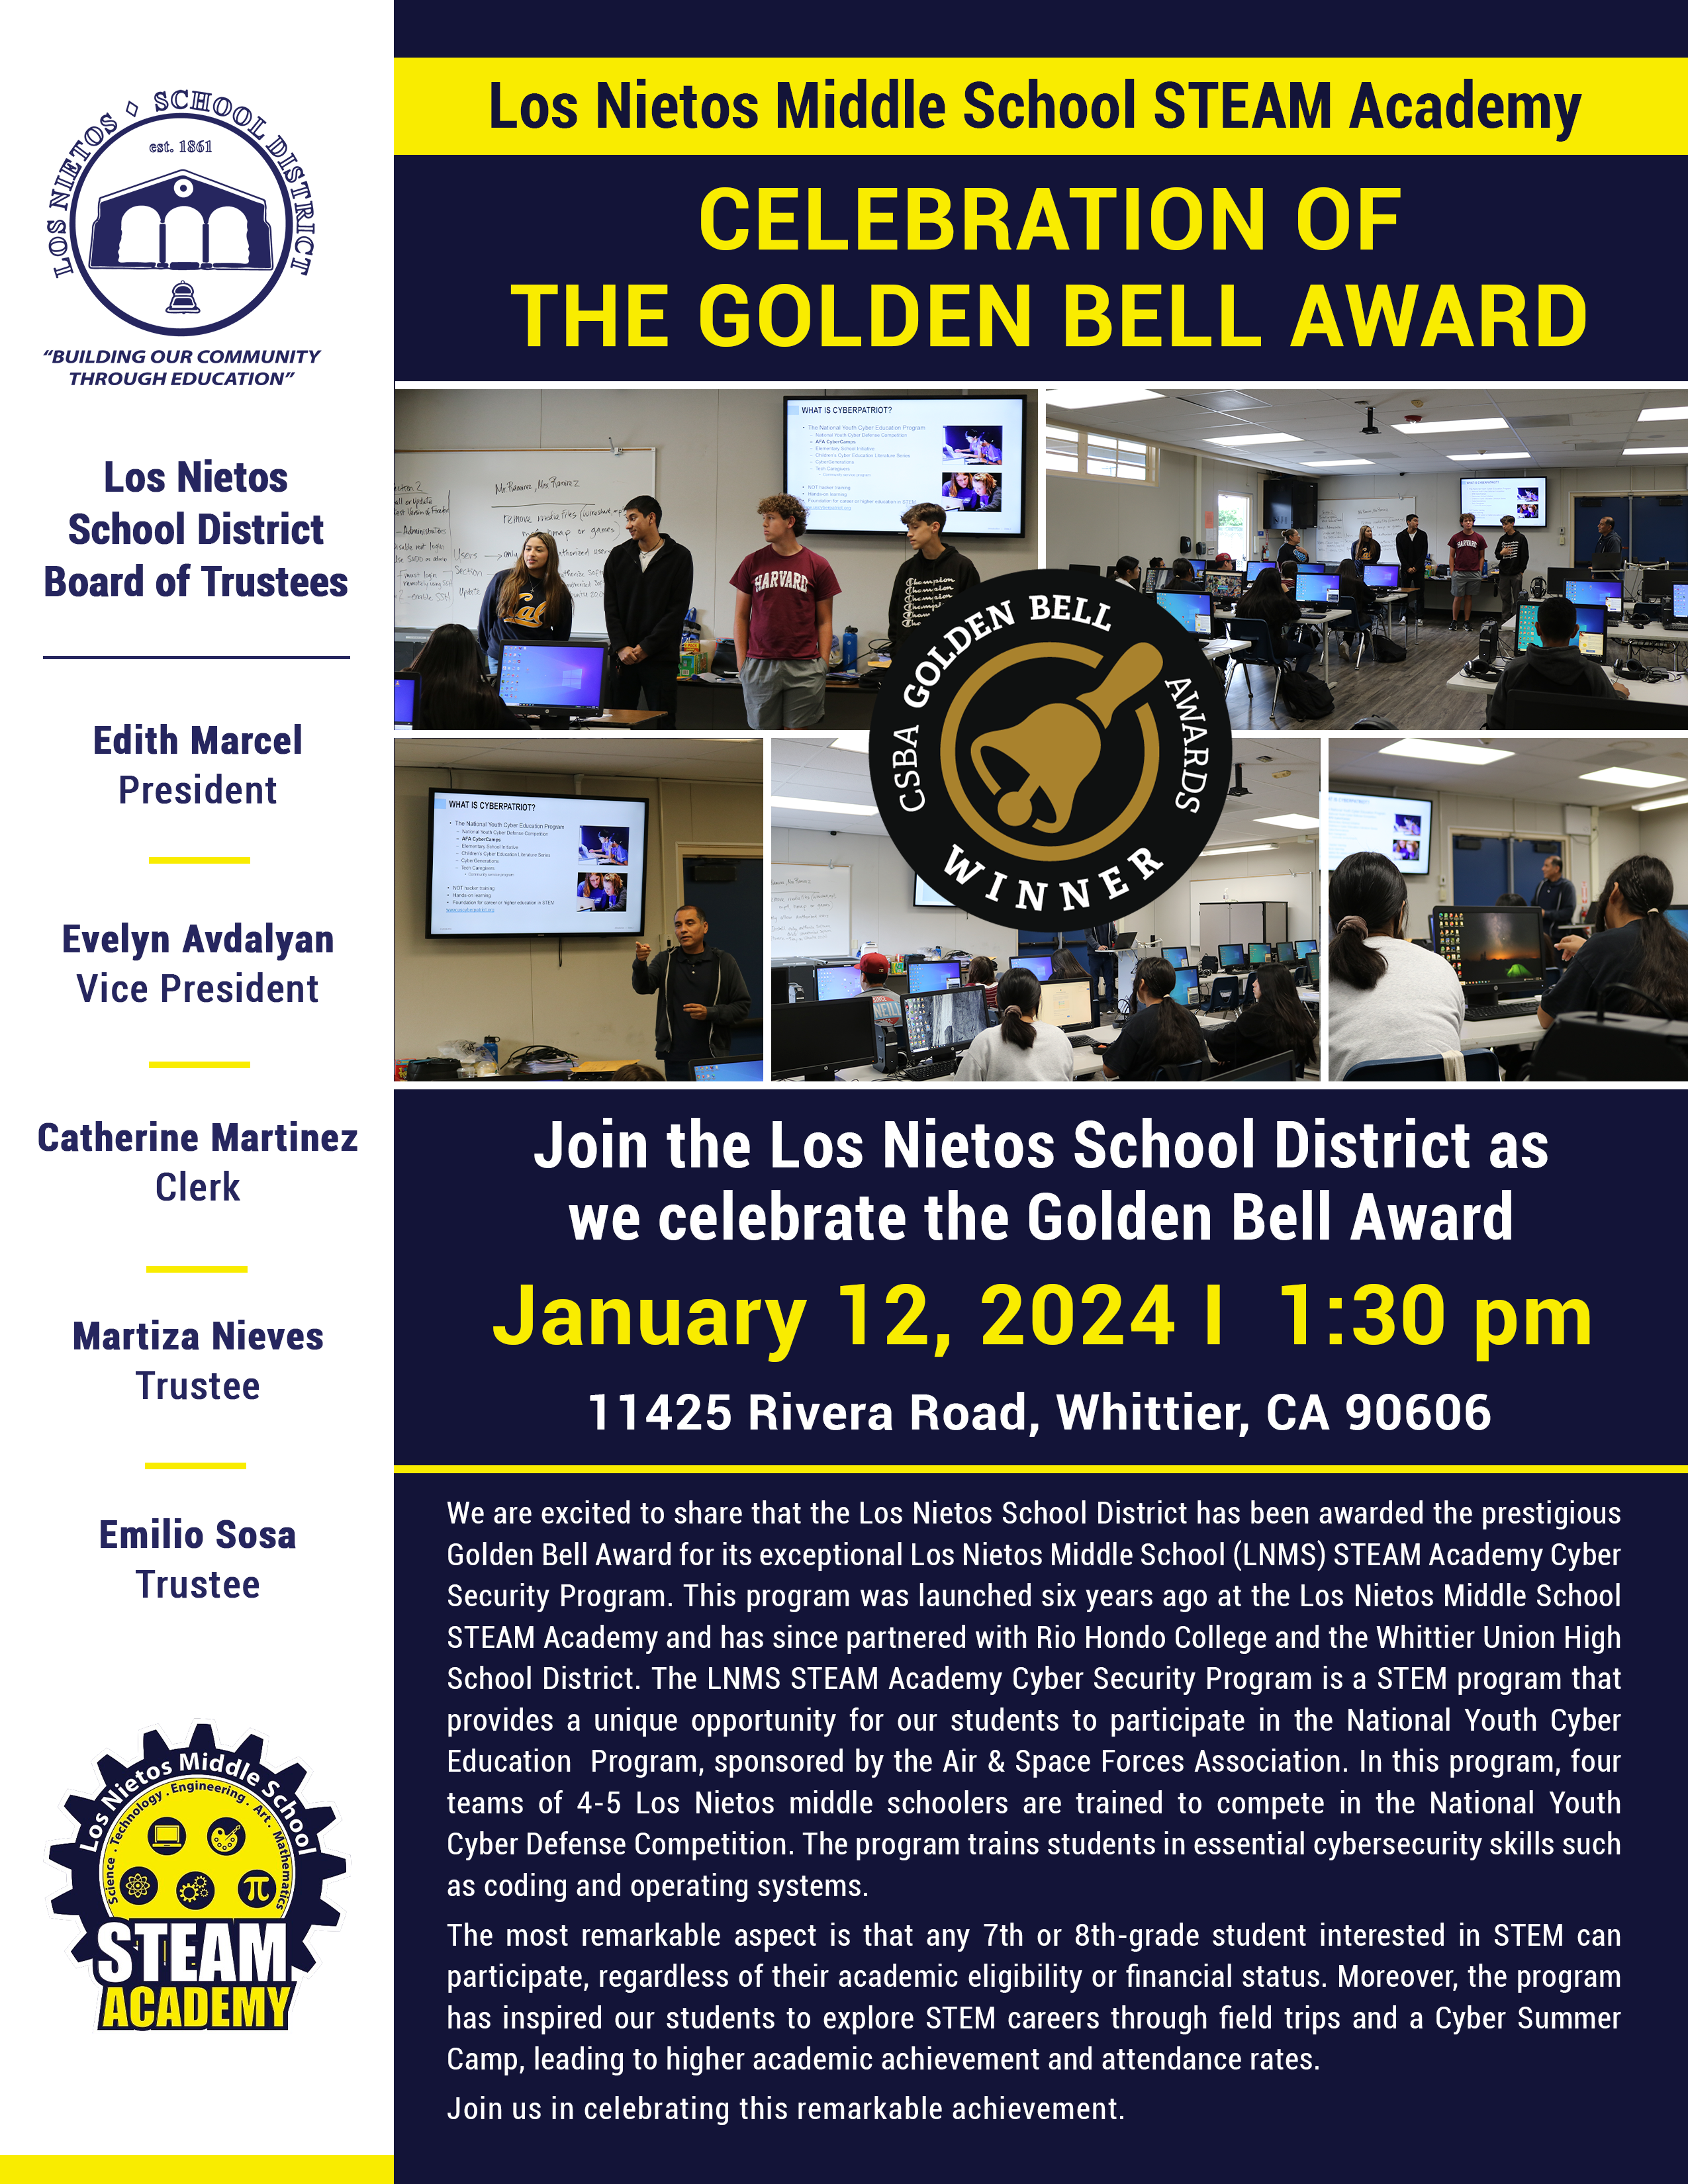 Flyer for the Los Nietos Middle School STEAM Academy's celebration of winning the Golden Bell Award. Features a collage of images showing students and teachers in a computer lab, the school logo, and details of the event on January 12, 2024, at the school's address in Whittier, CA. The flyer is dominated by blue and yellow colors and includes the school district's Board of Trustees with names and positions.